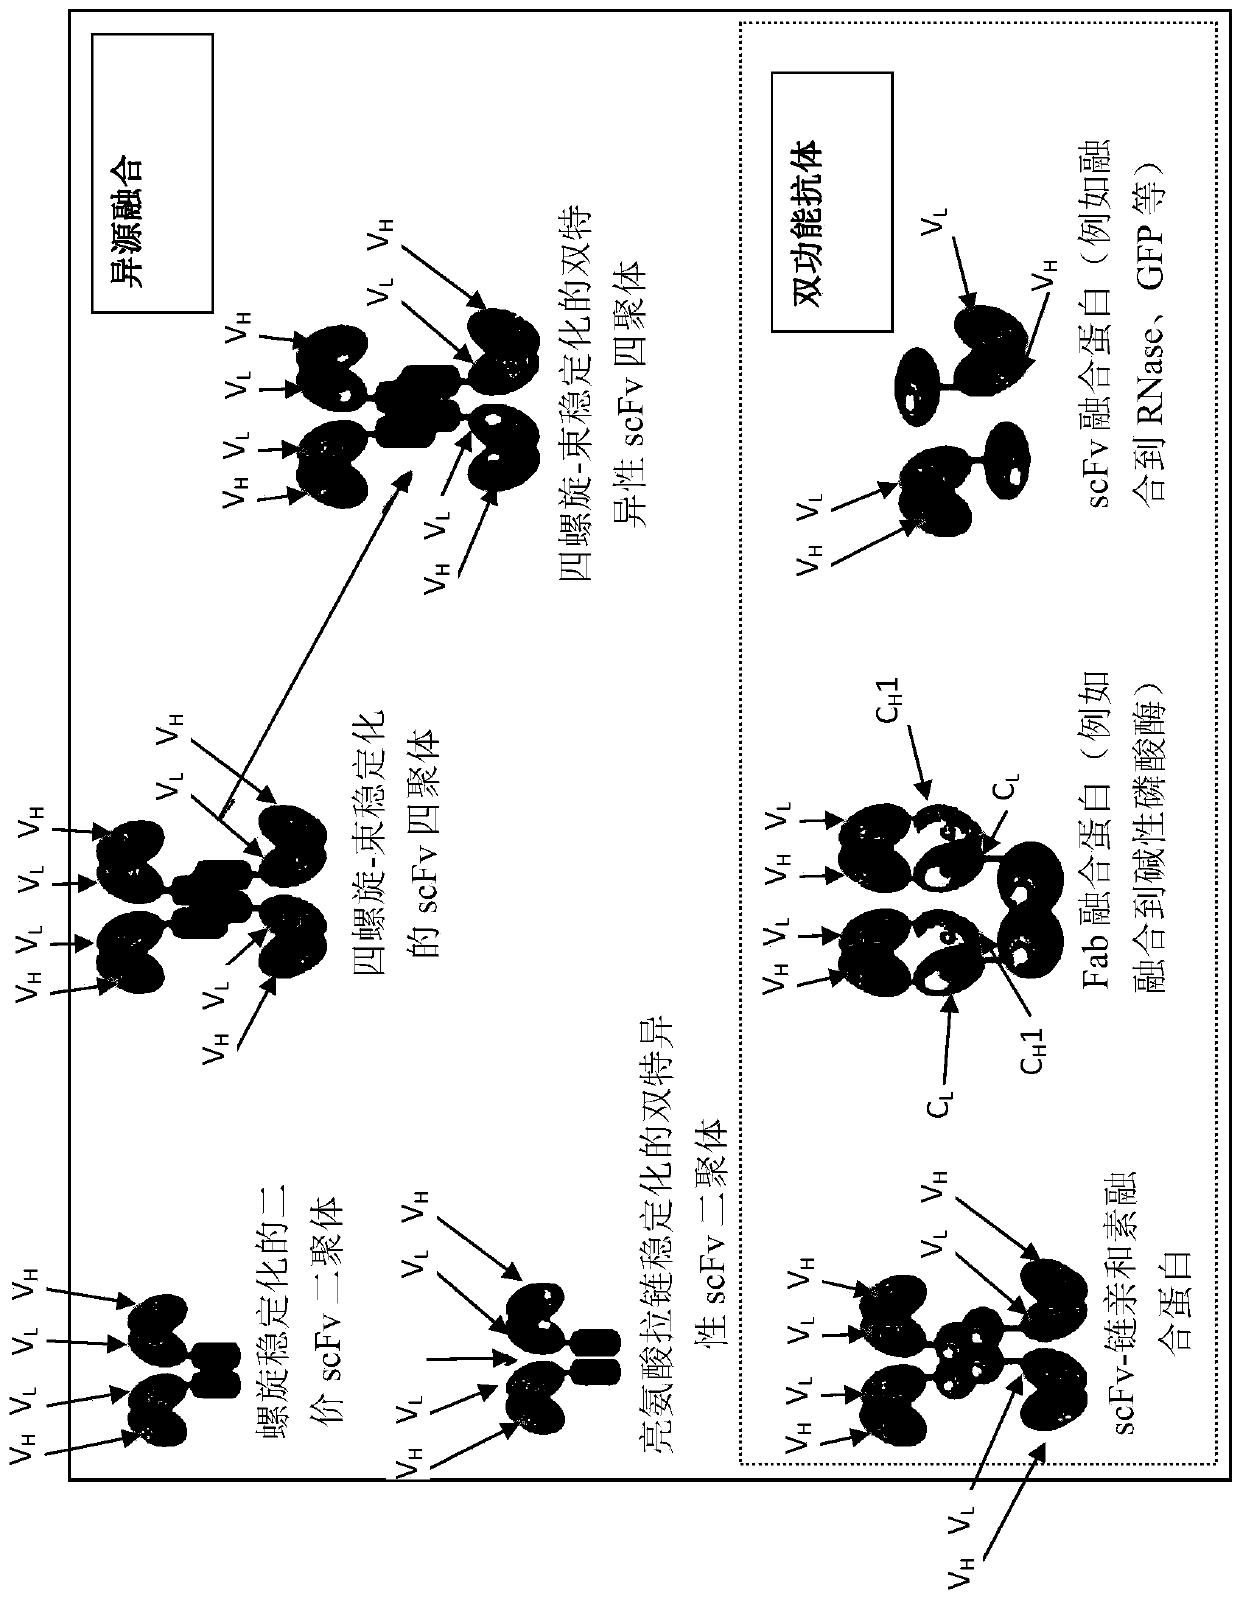 Anti-adrenomedullin (ADM) antibody or Anti-adm antibody fragment or Anti-adm non-ig scaffold for use in intervention and therapy of congestion in a patient in need thereof